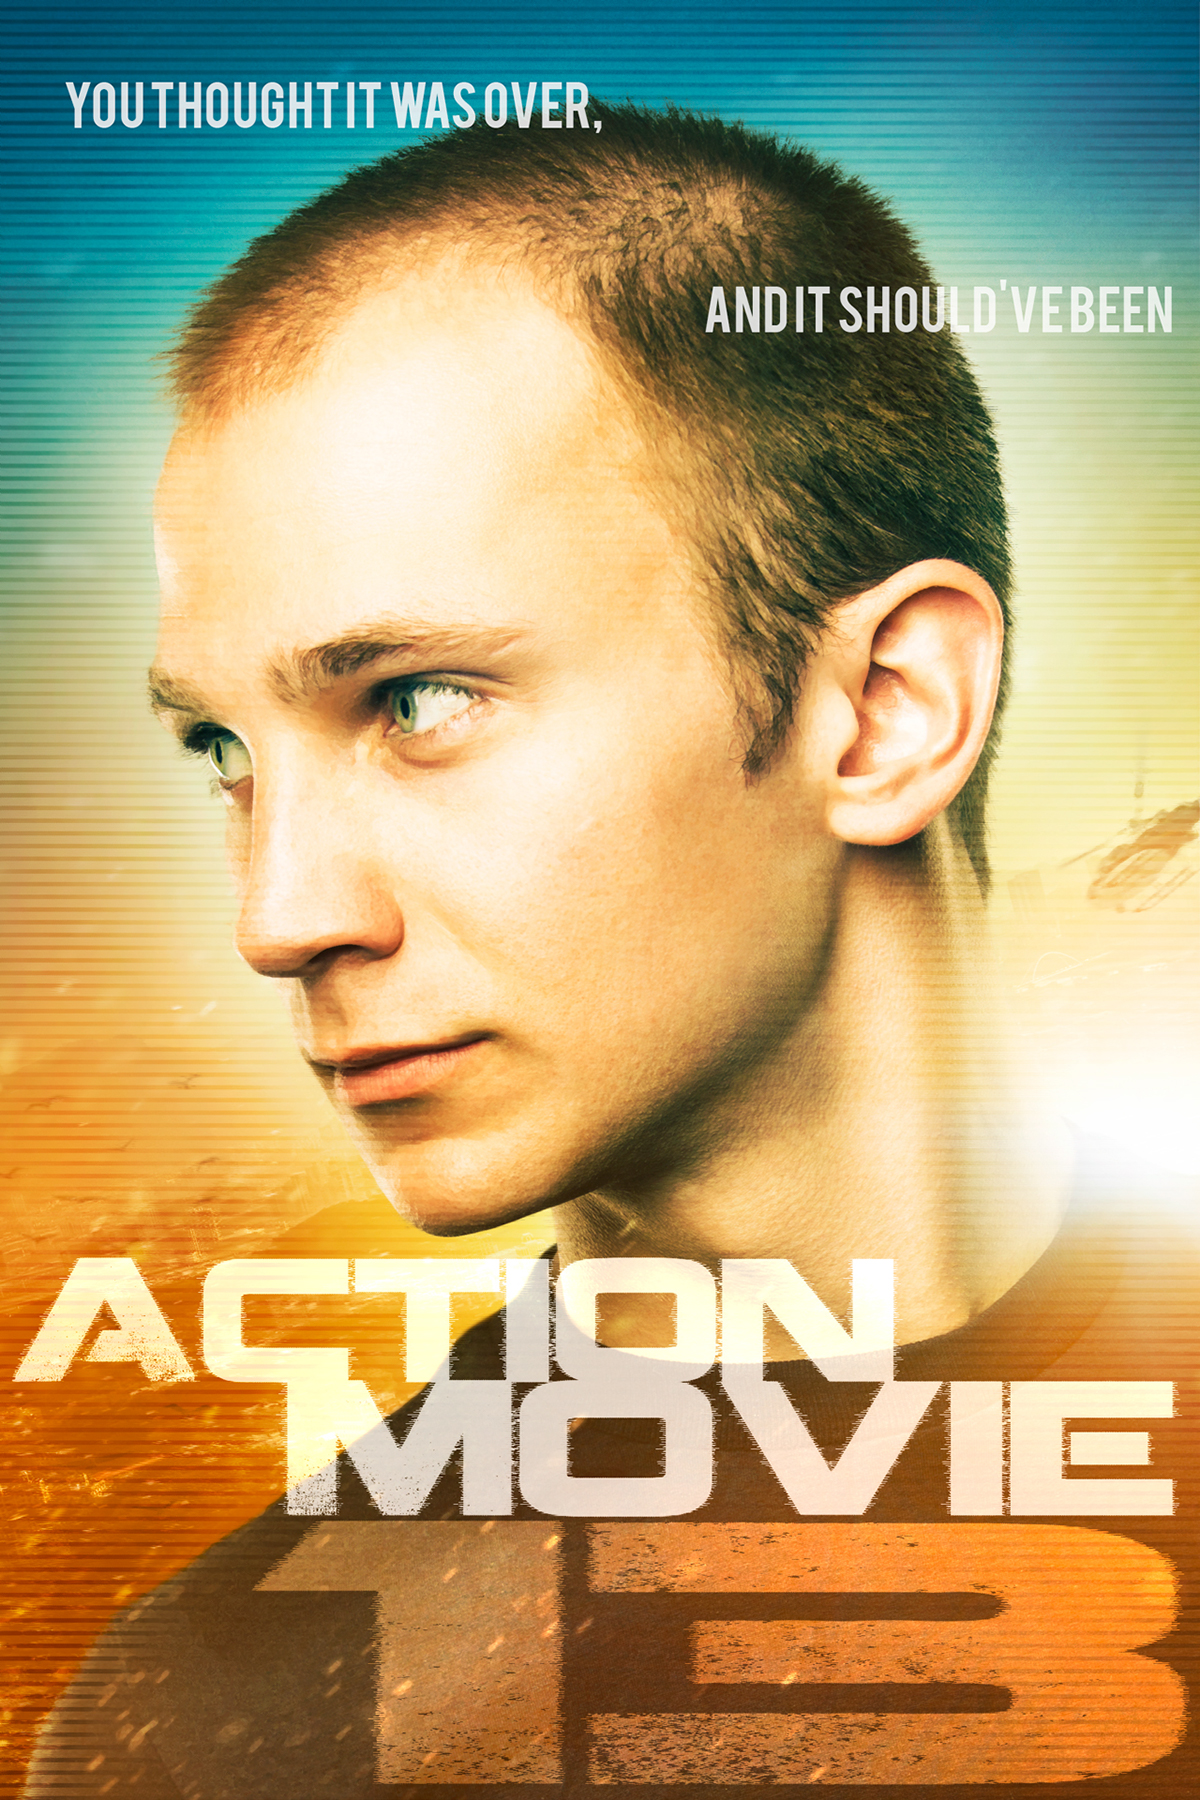 action movie drew lundquist cover poster blockbuster